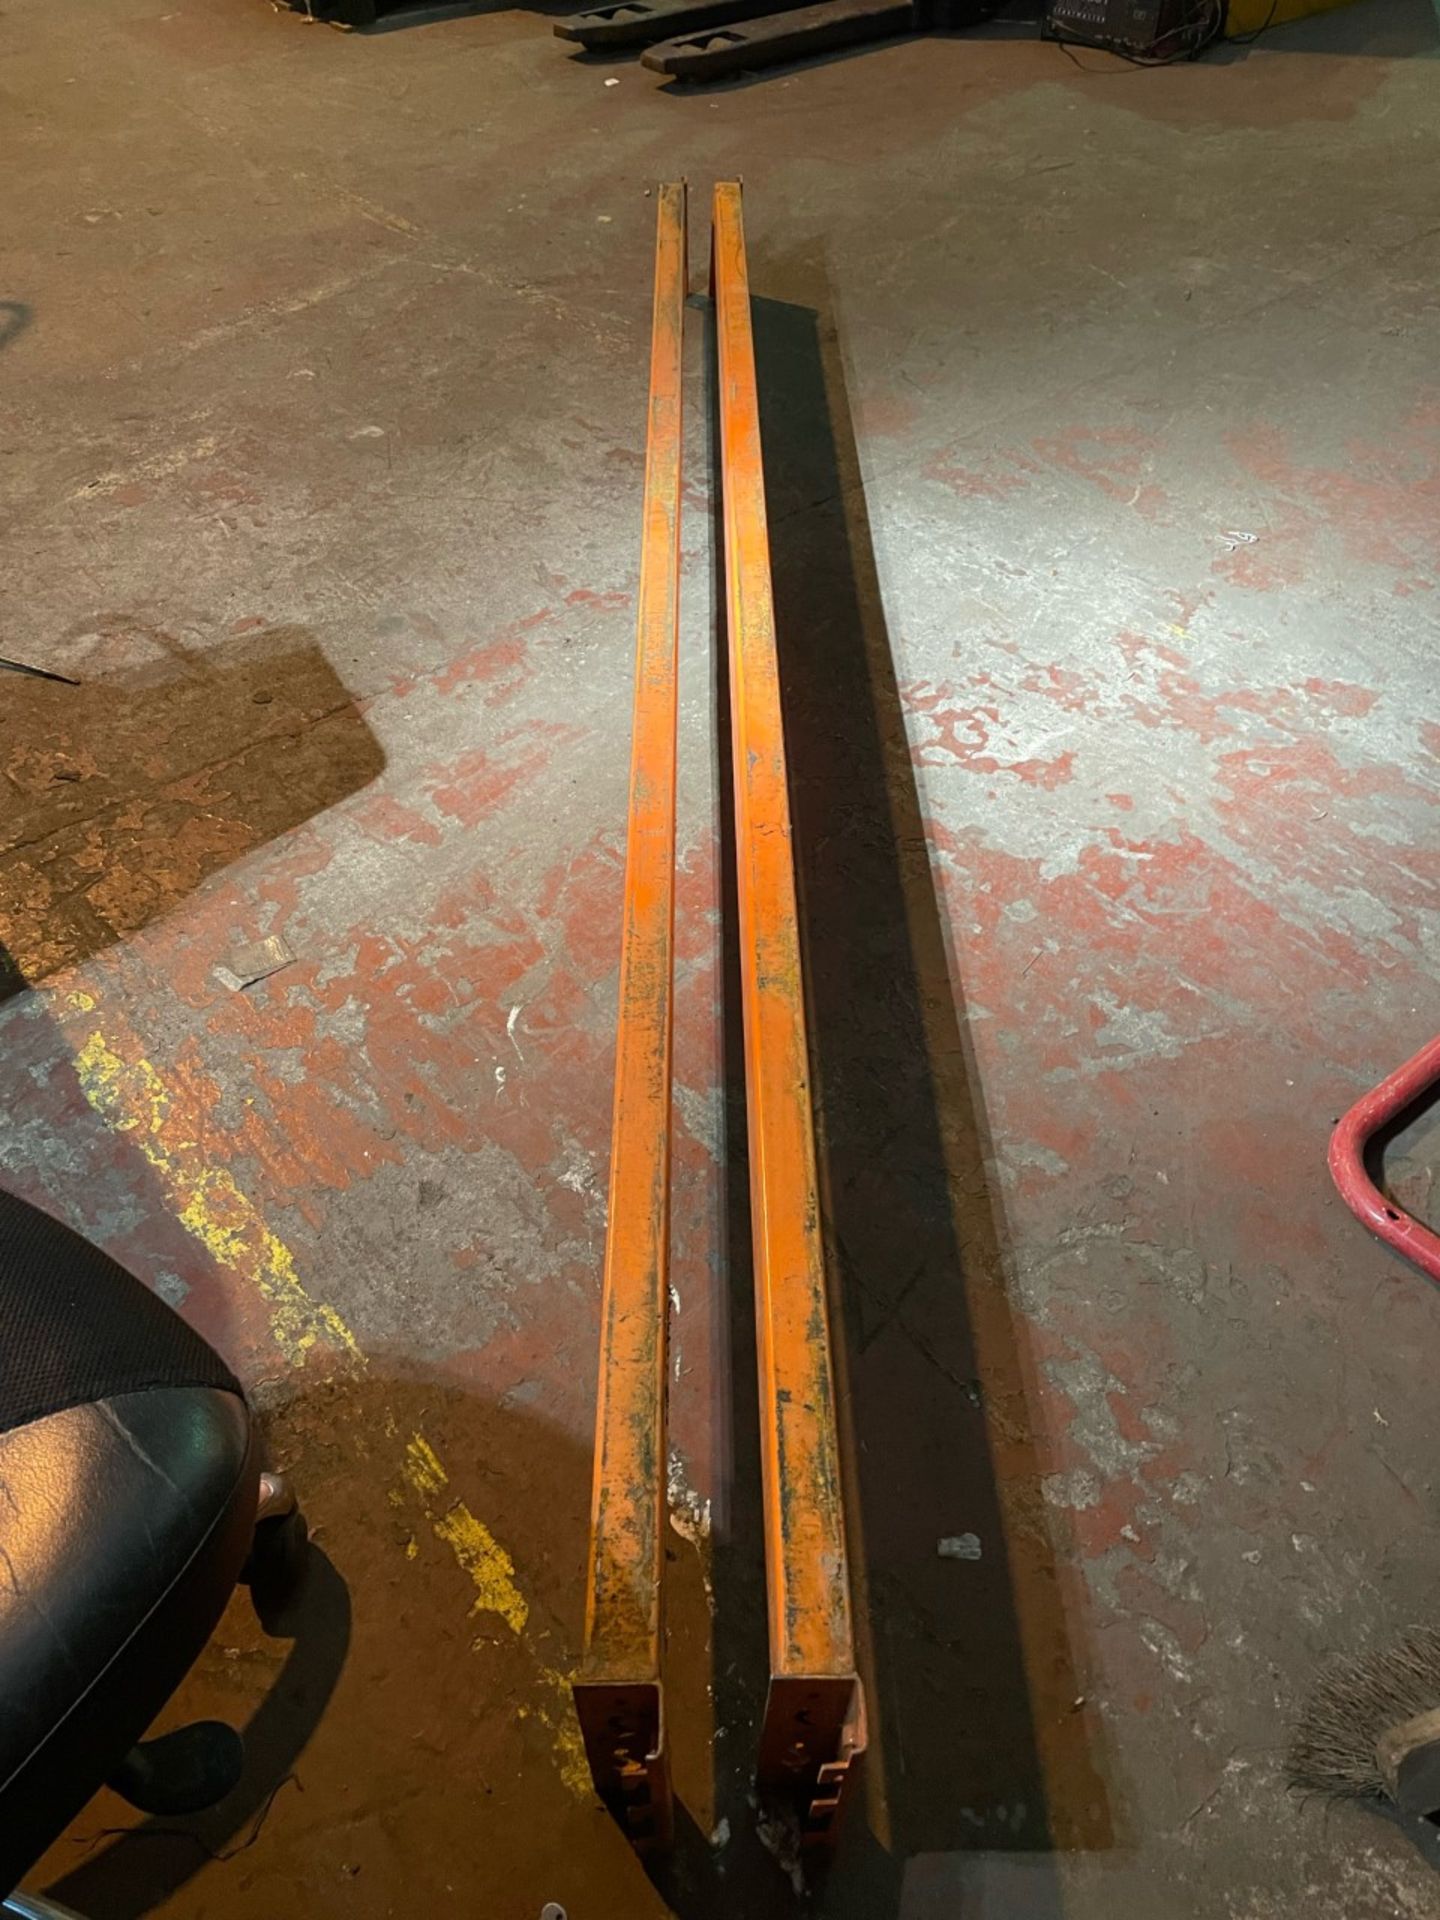 2 x Orange Racking Beams 2700mm in length. Good condition all connections are straight